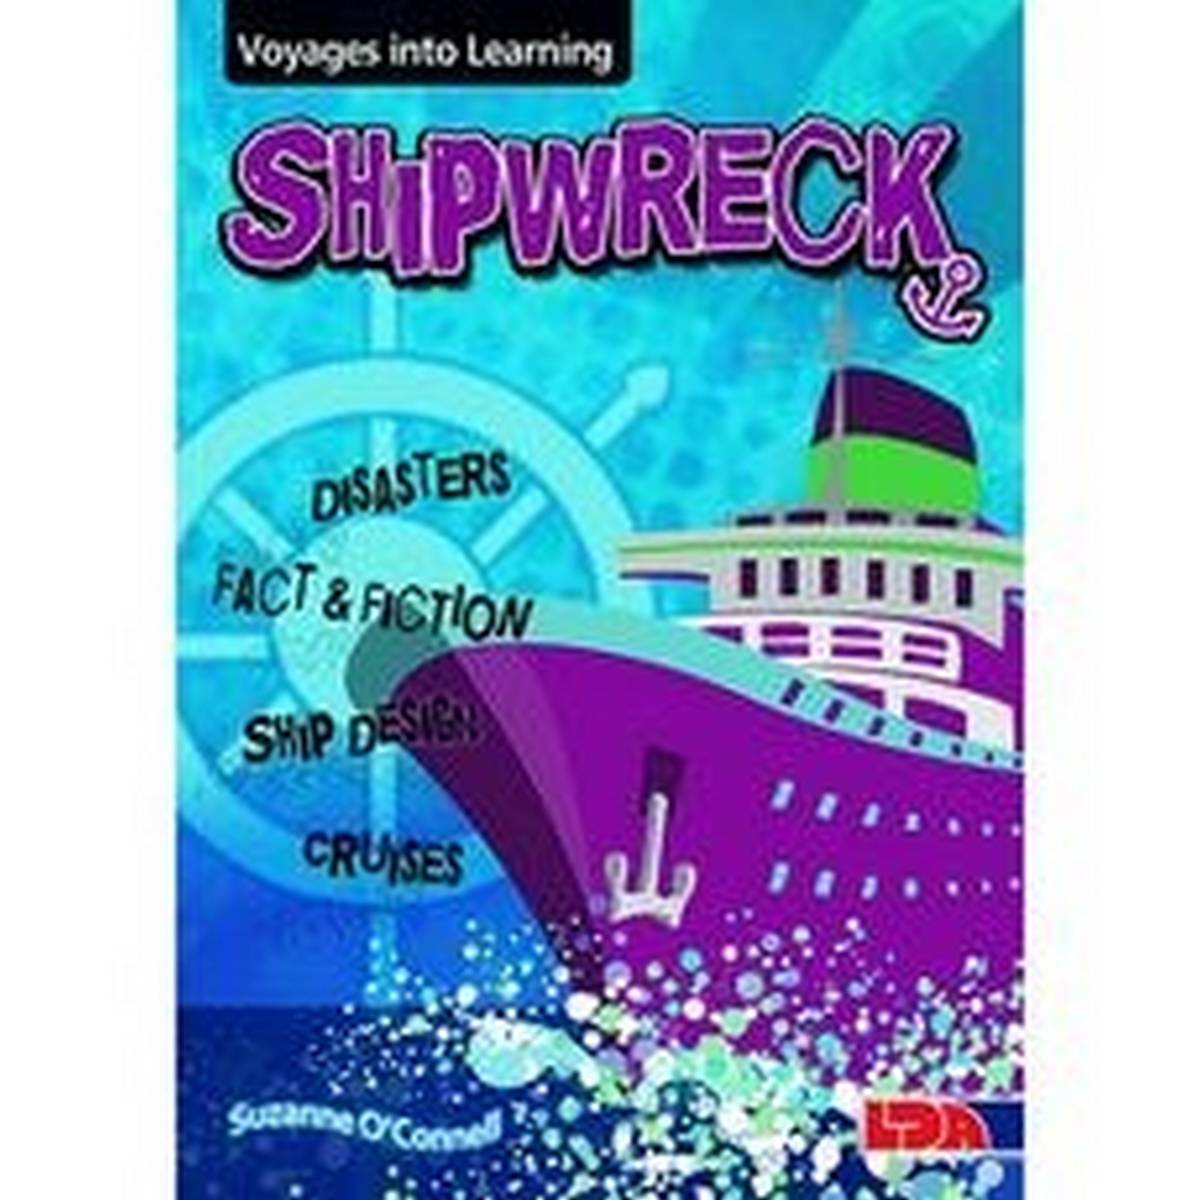 Voyages into Learning: Shipwreck